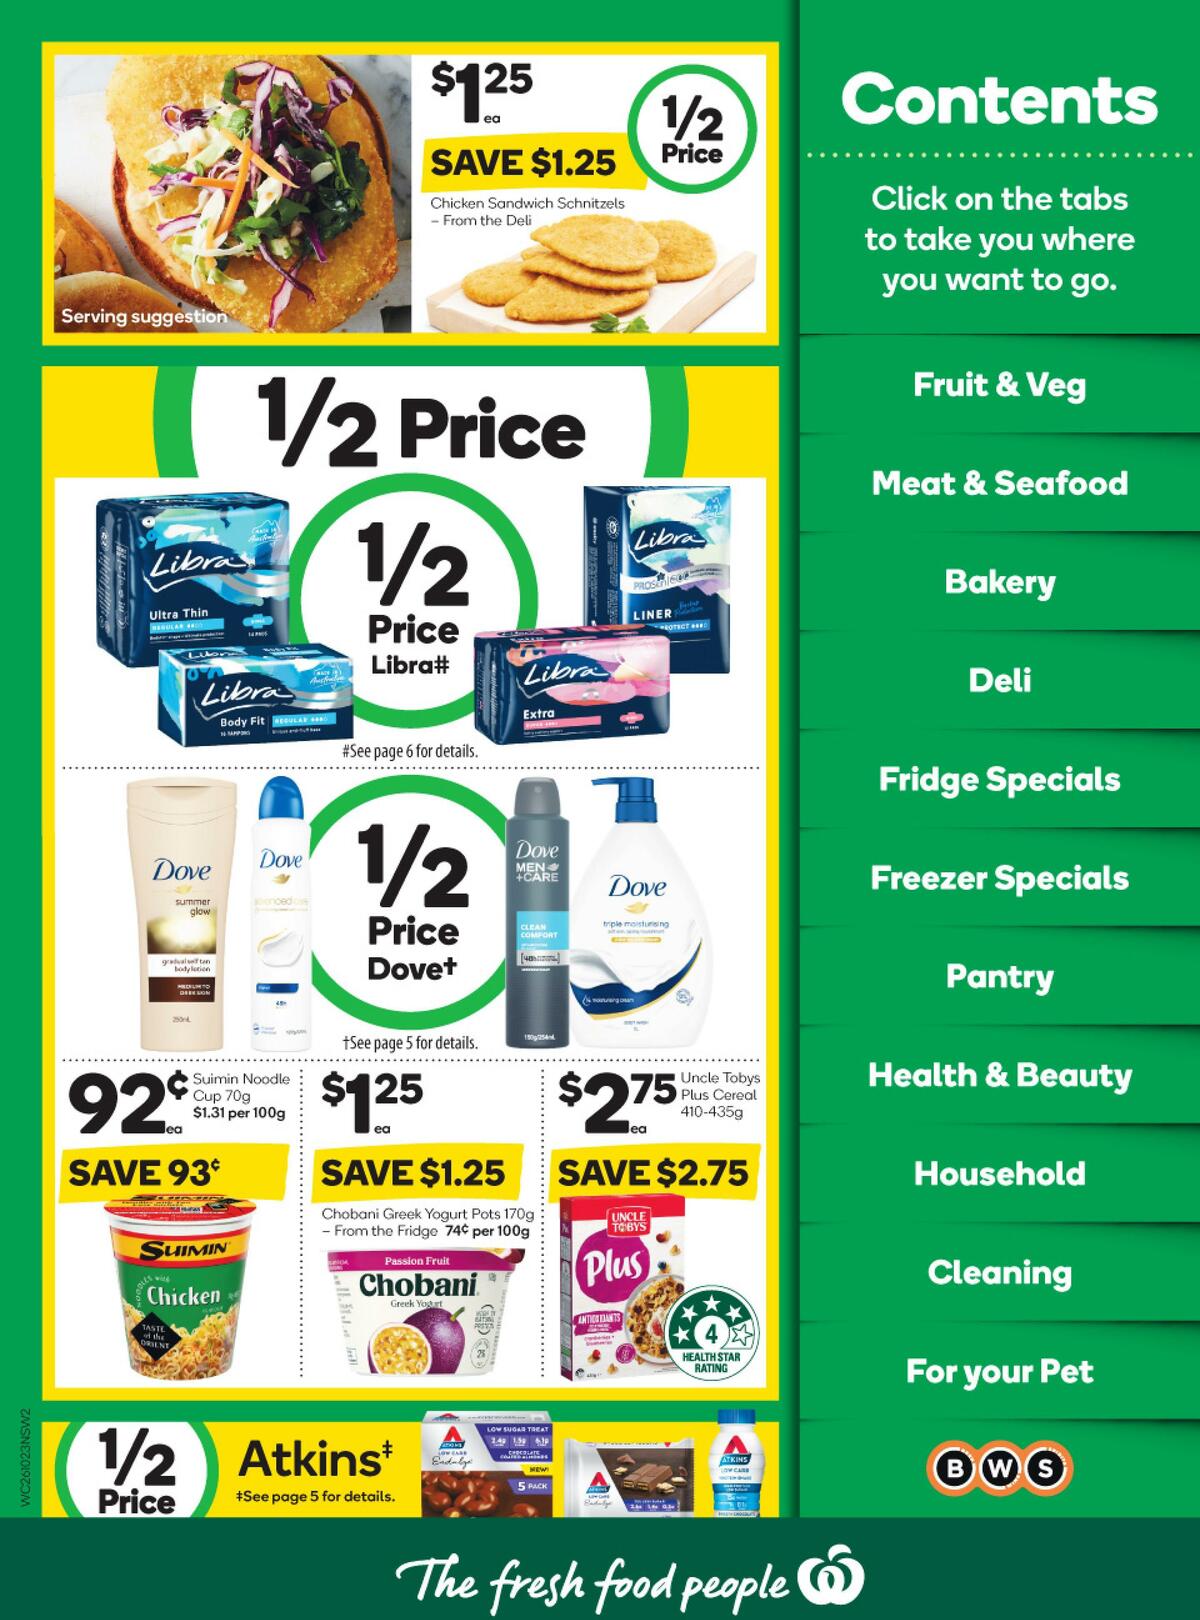 Woolworths Catalogues from 26 October